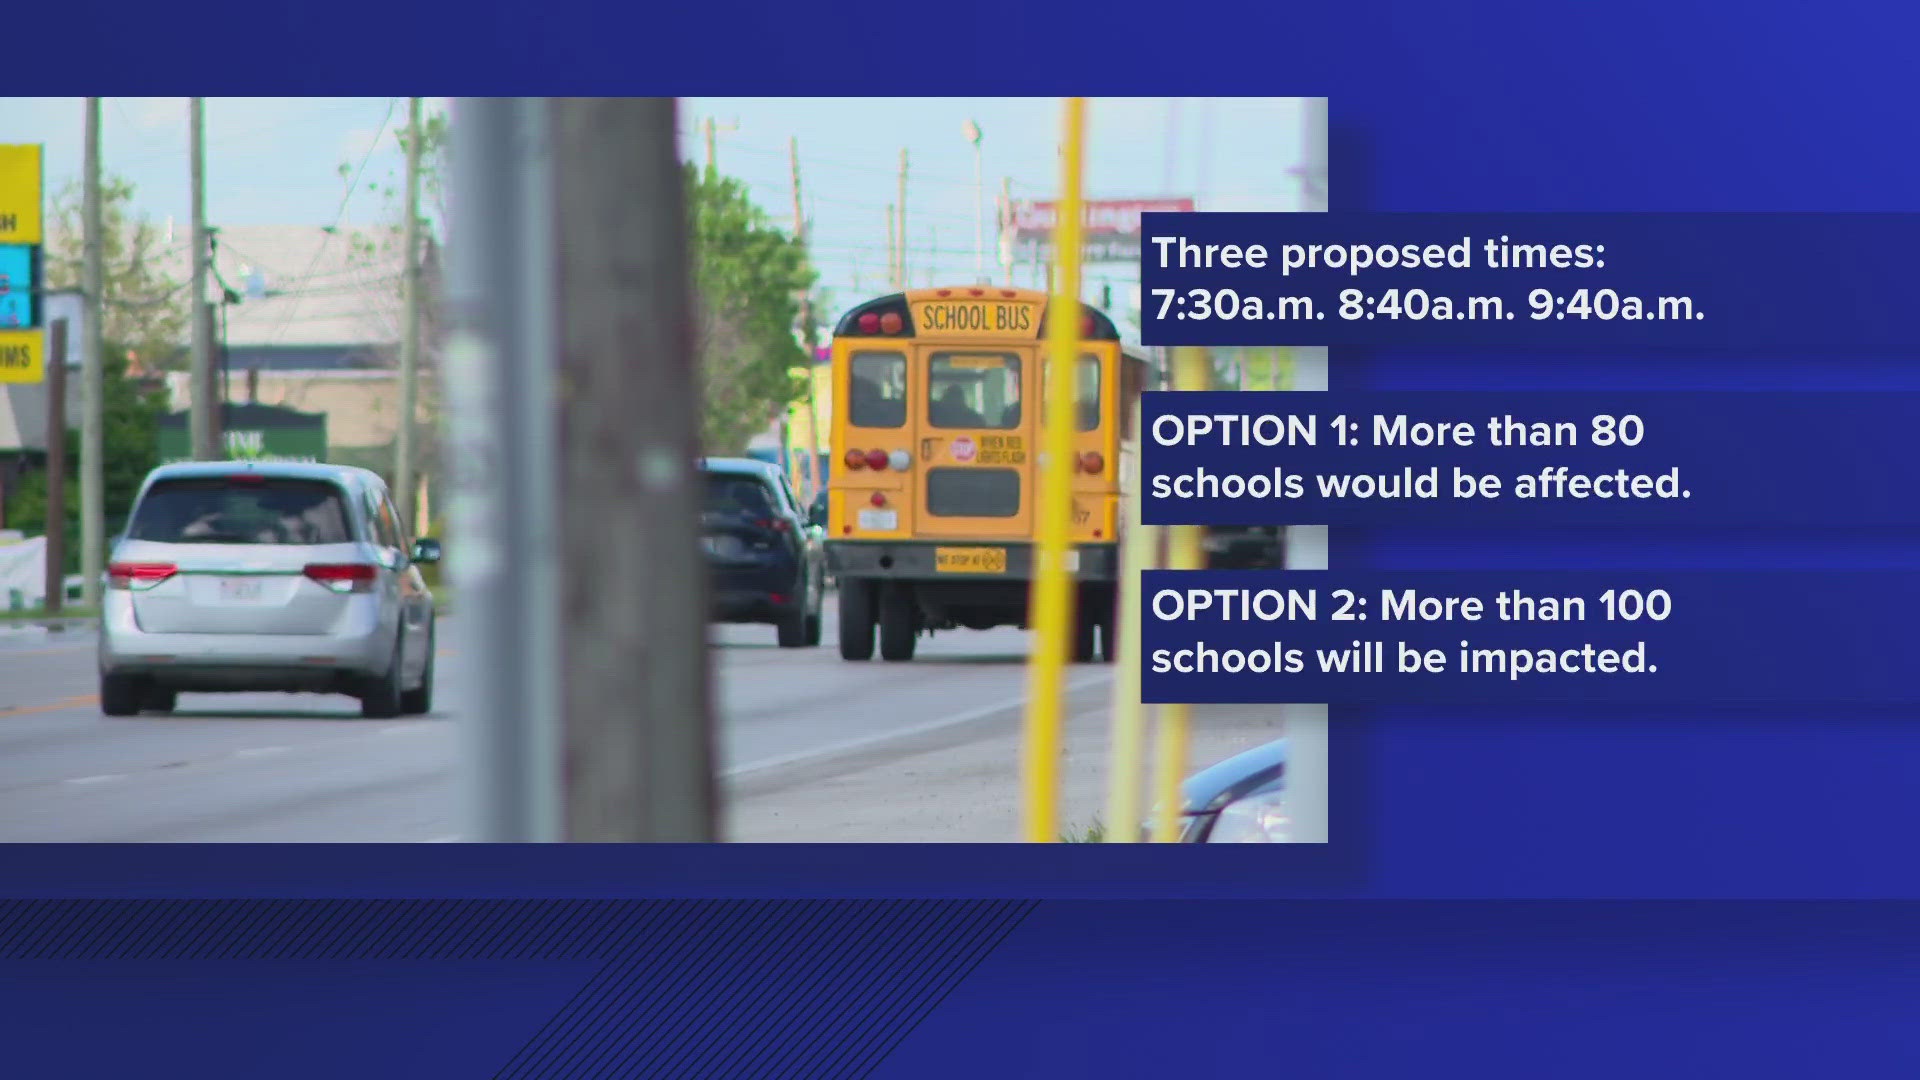 A Louisville mom is anxiously awaiting a decision on the proposed JCPS start times that could impact her family.